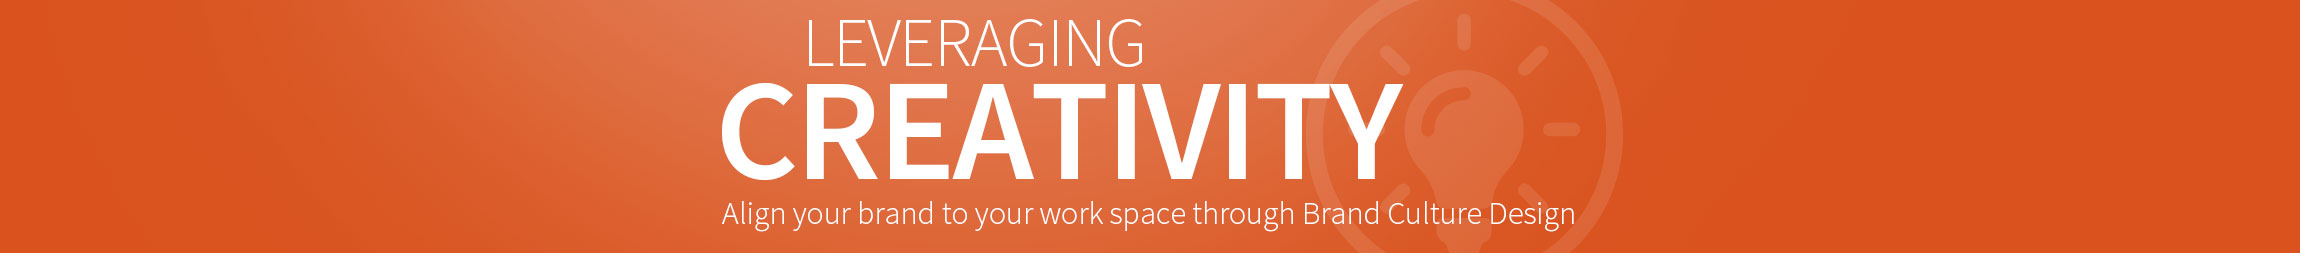 Leveraging Creativity - Align Your Brand to your workspace through brand culture design